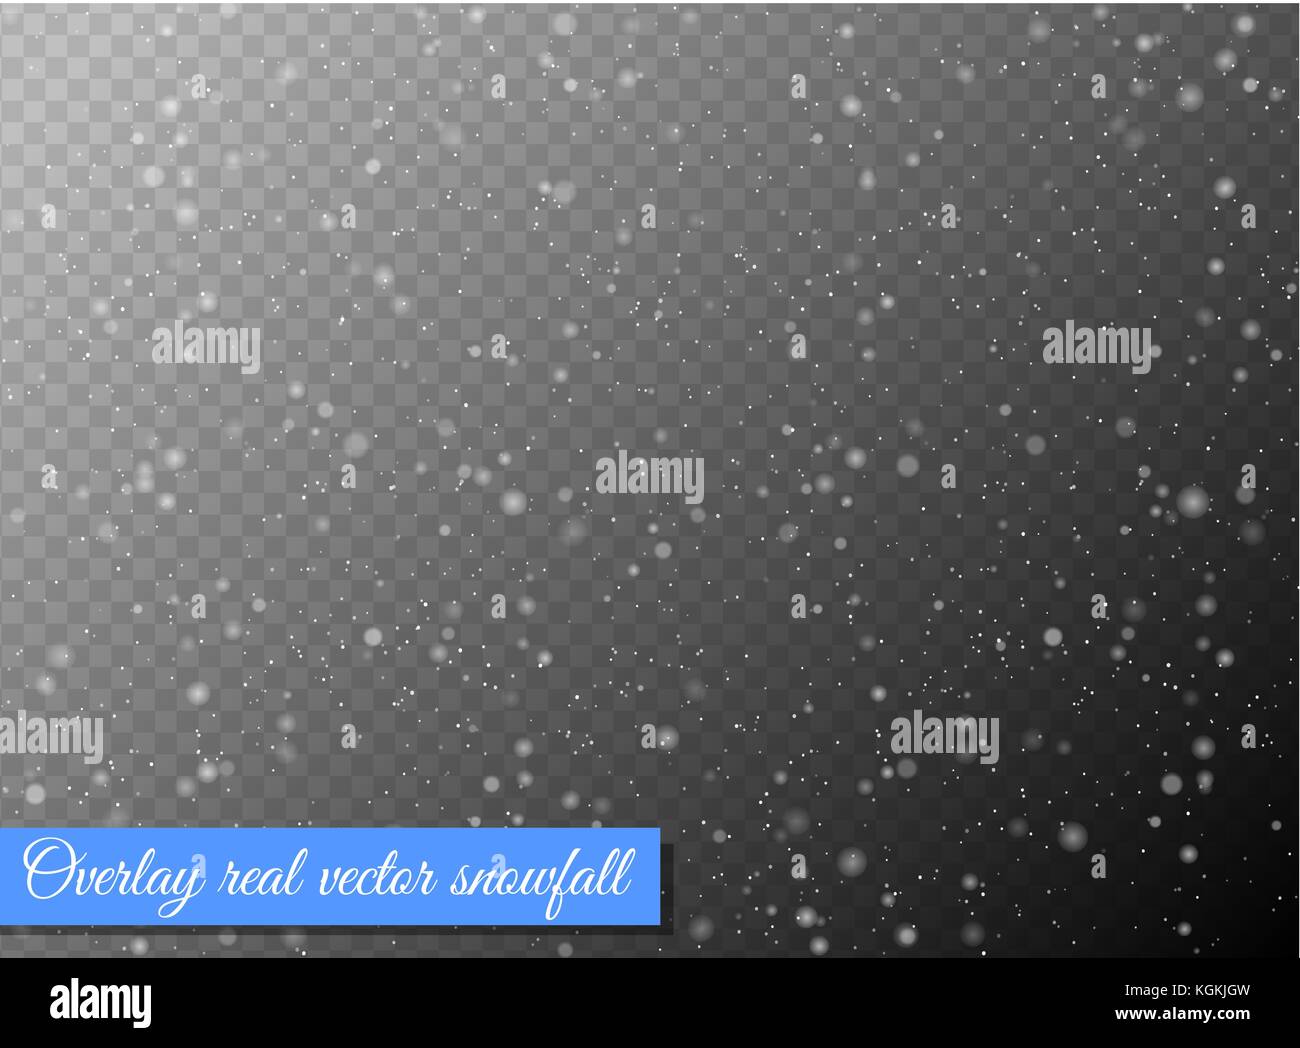 Seamless vector white snowfall effect on black transparent horizontal background. Overlay snow flake Christmas or New Year winter effect. Stock Vector